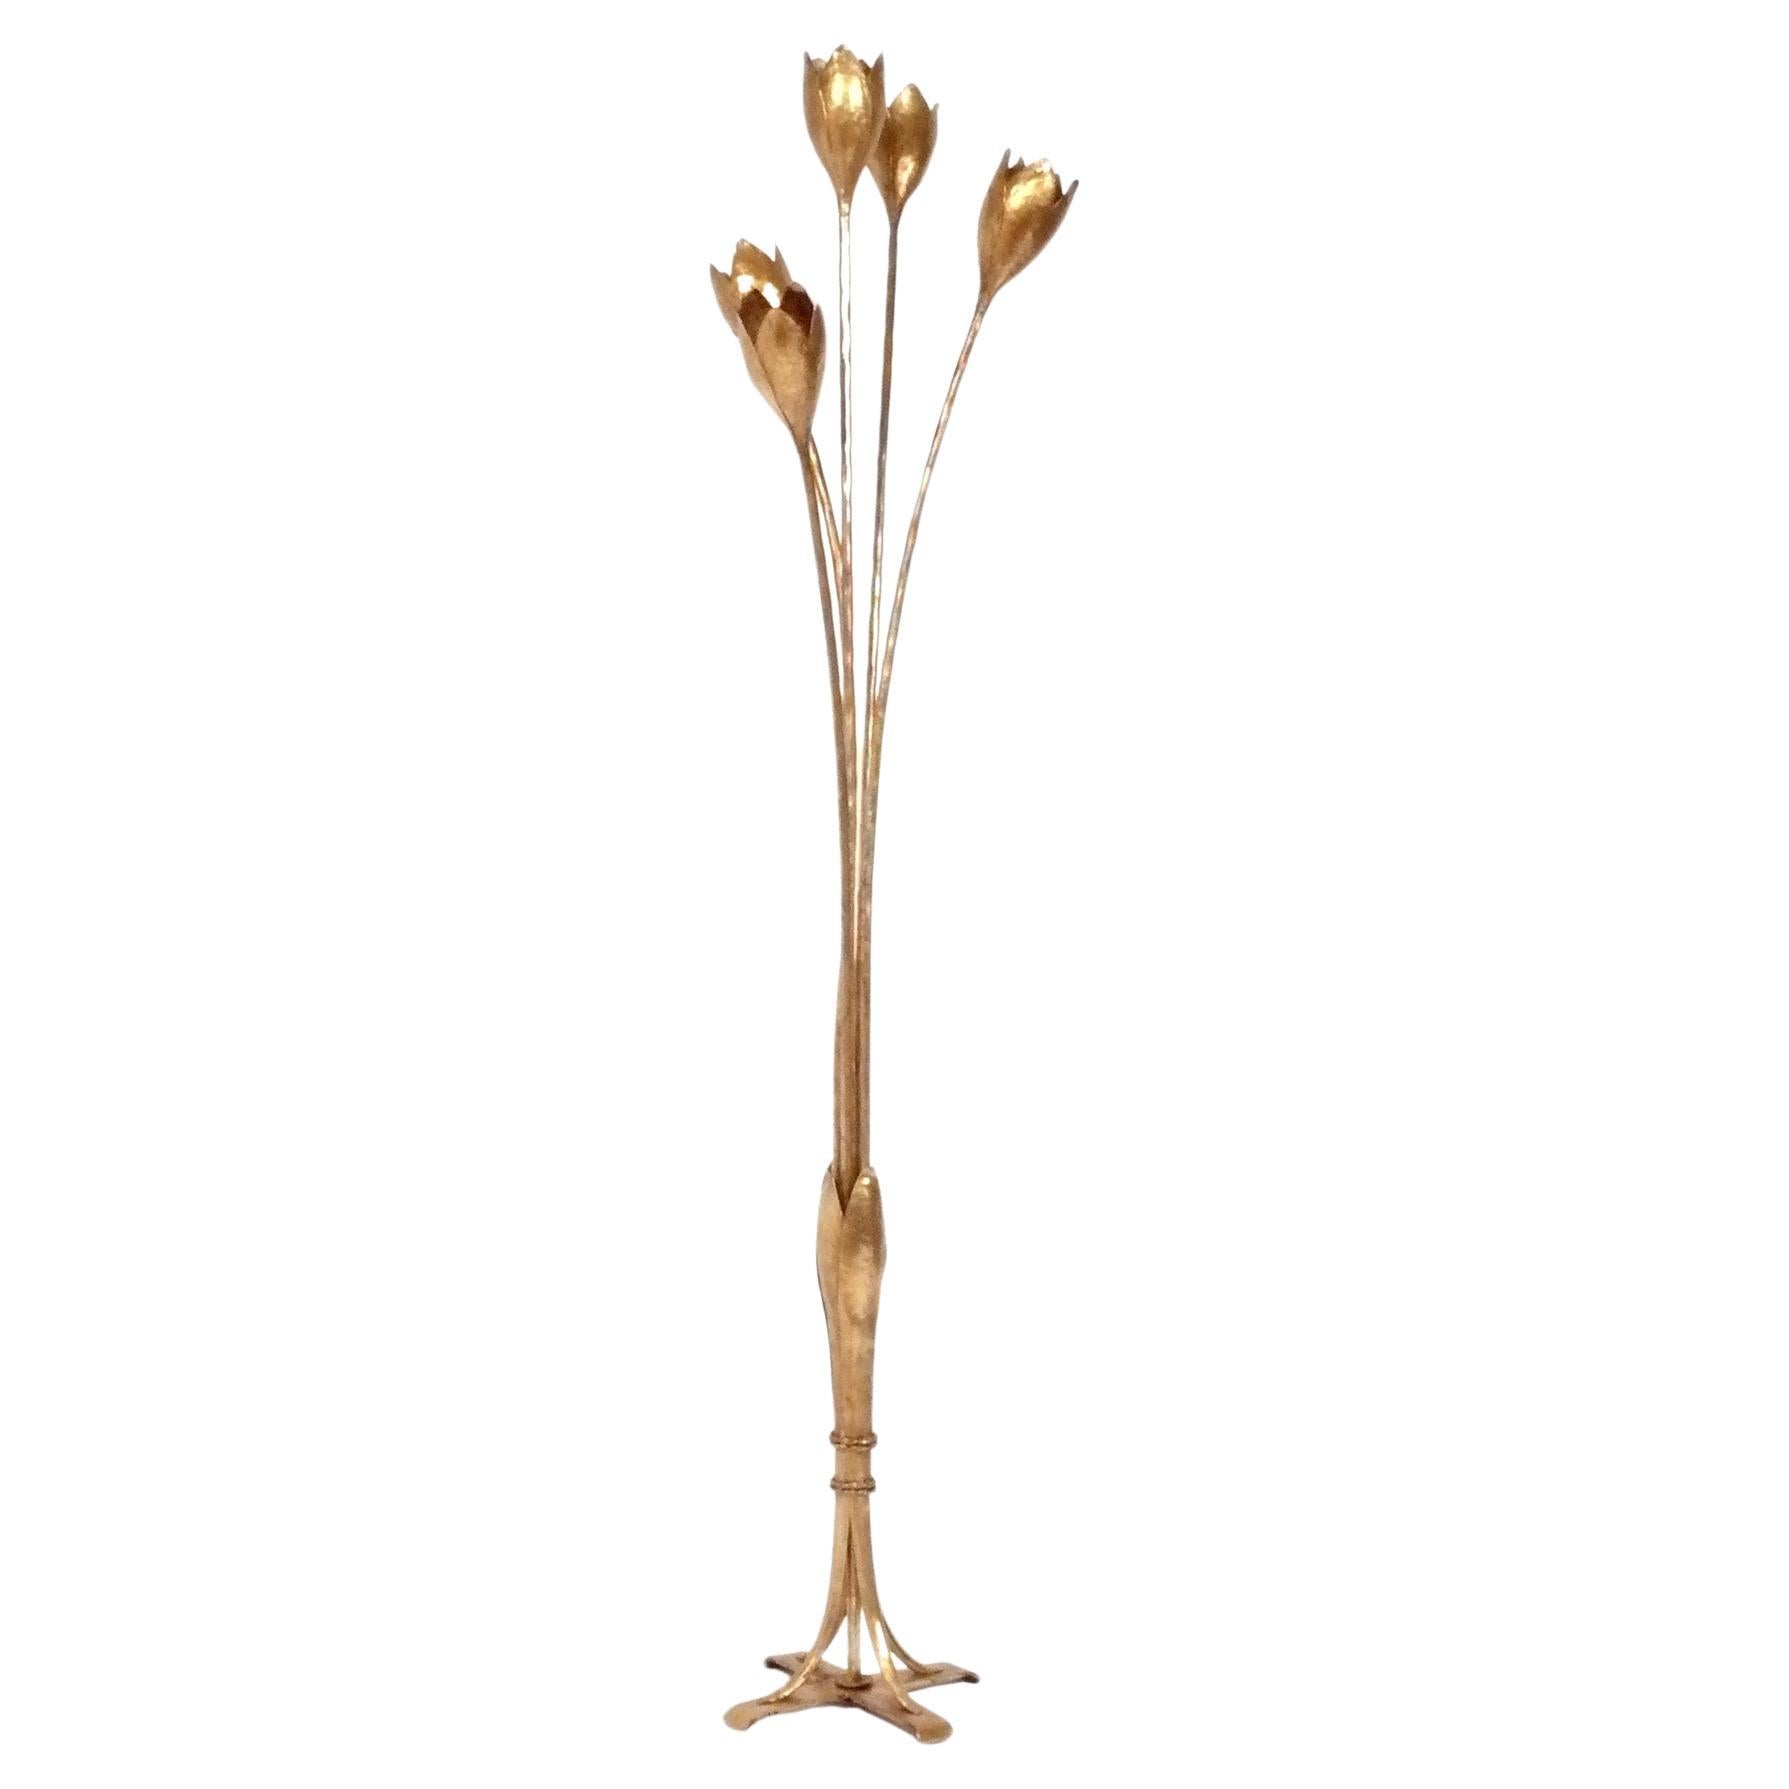 1940s French Floriform Gilt Metal Floor Lamp attributed to Maison Bagues For Sale